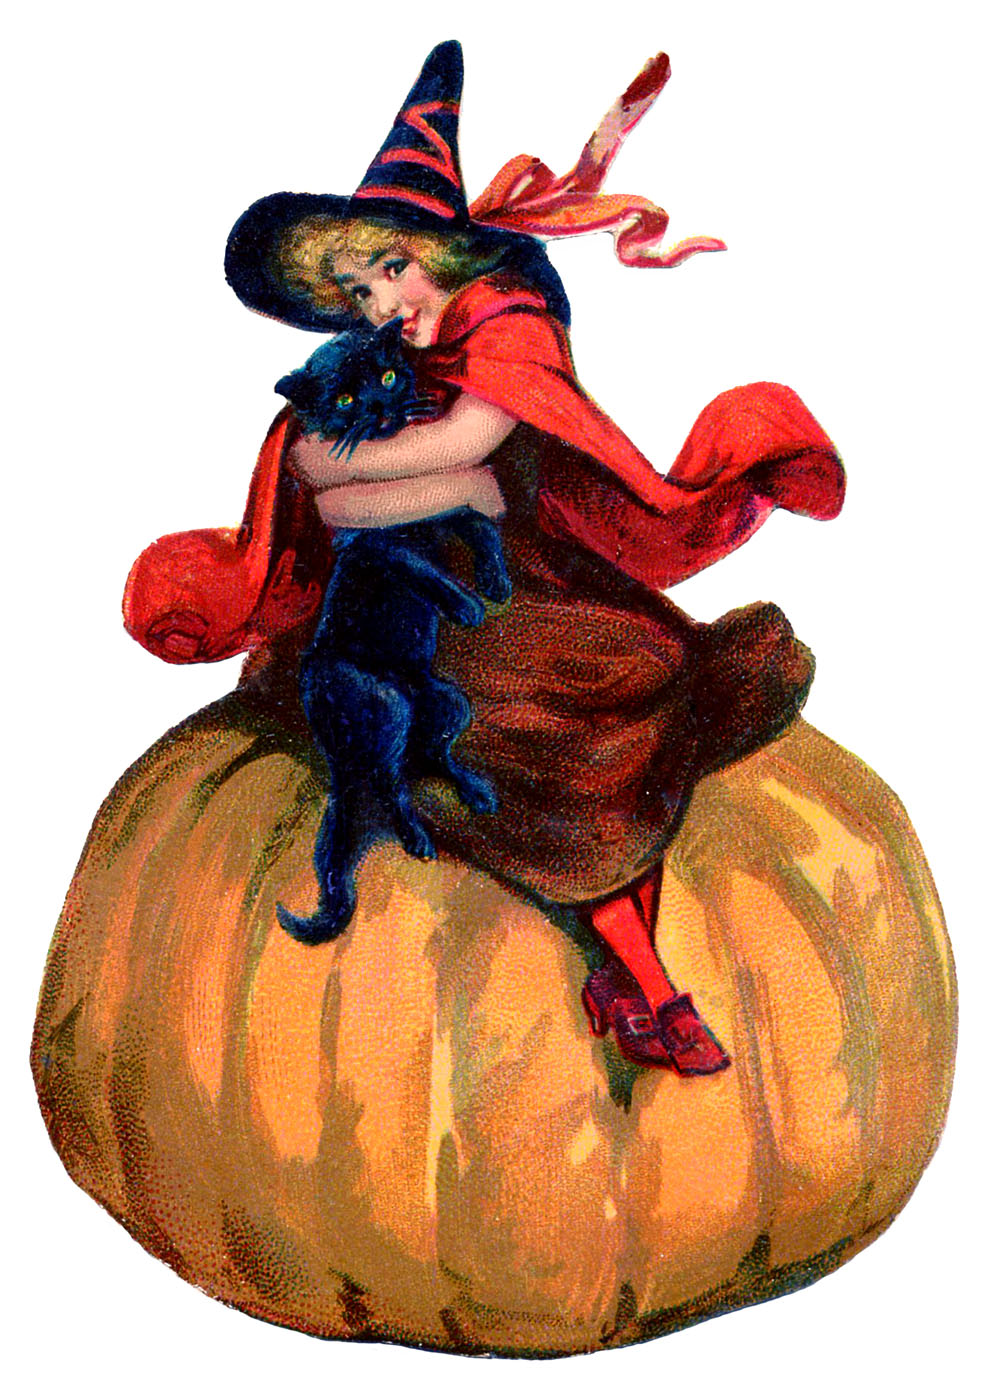 Vintage Halloween Image - Adorable Witch with Pumpkin - The ...